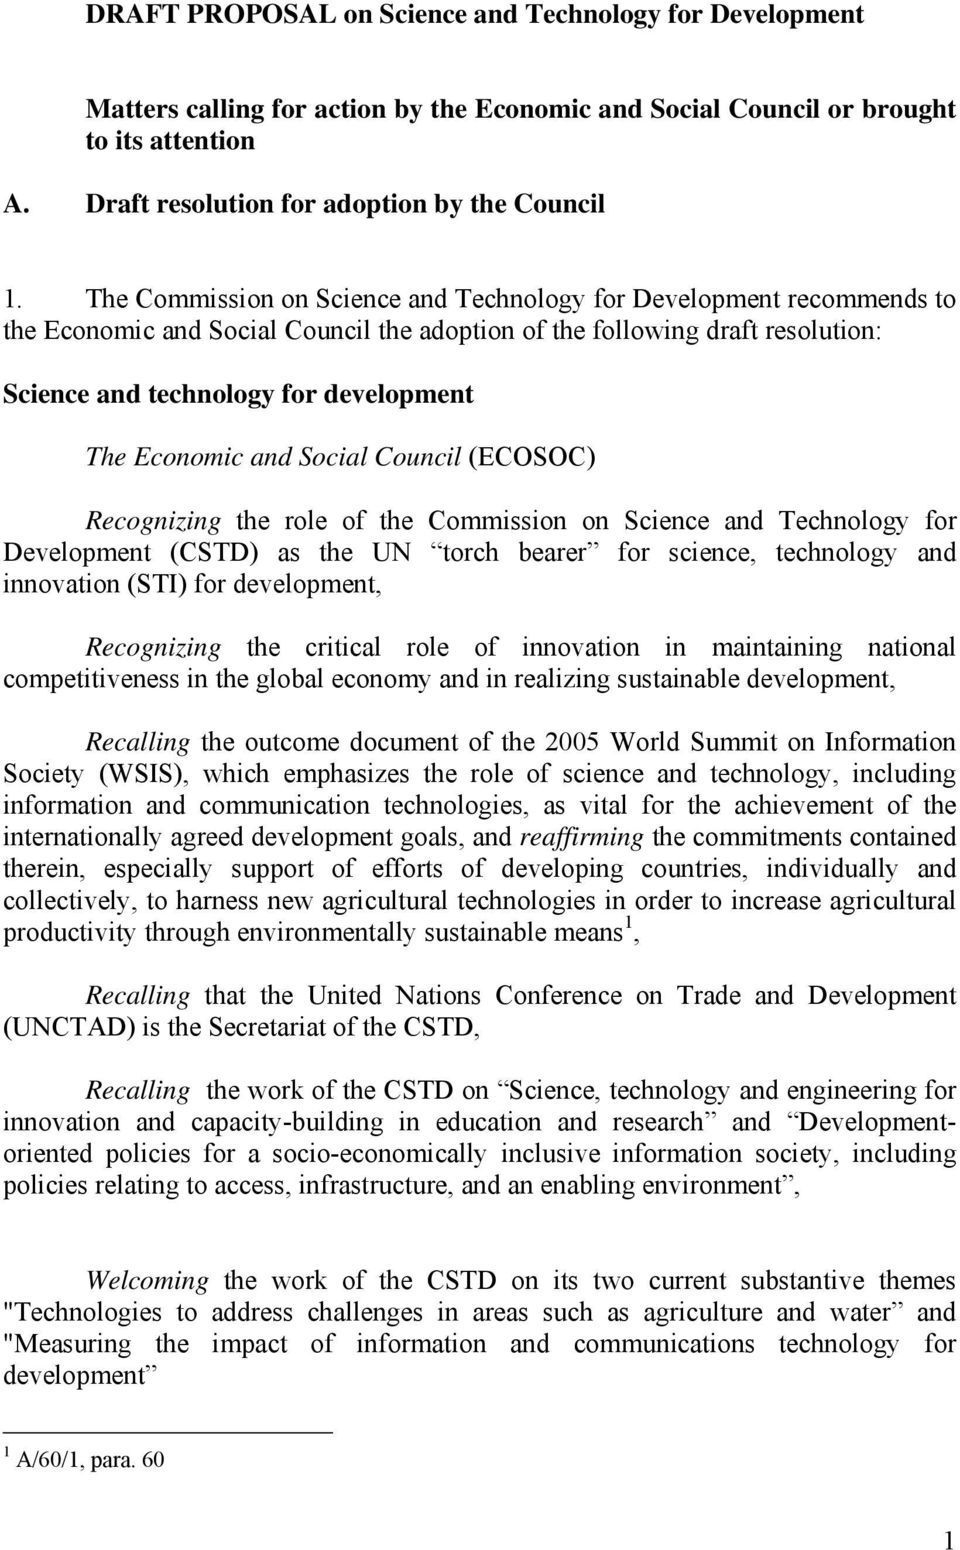 Economic and Social Council (ECOSOC) Recognizing the role of the Commission on Science and Technology for Development (CSTD) as the UN torch bearer for science, technology and innovation (STI) for